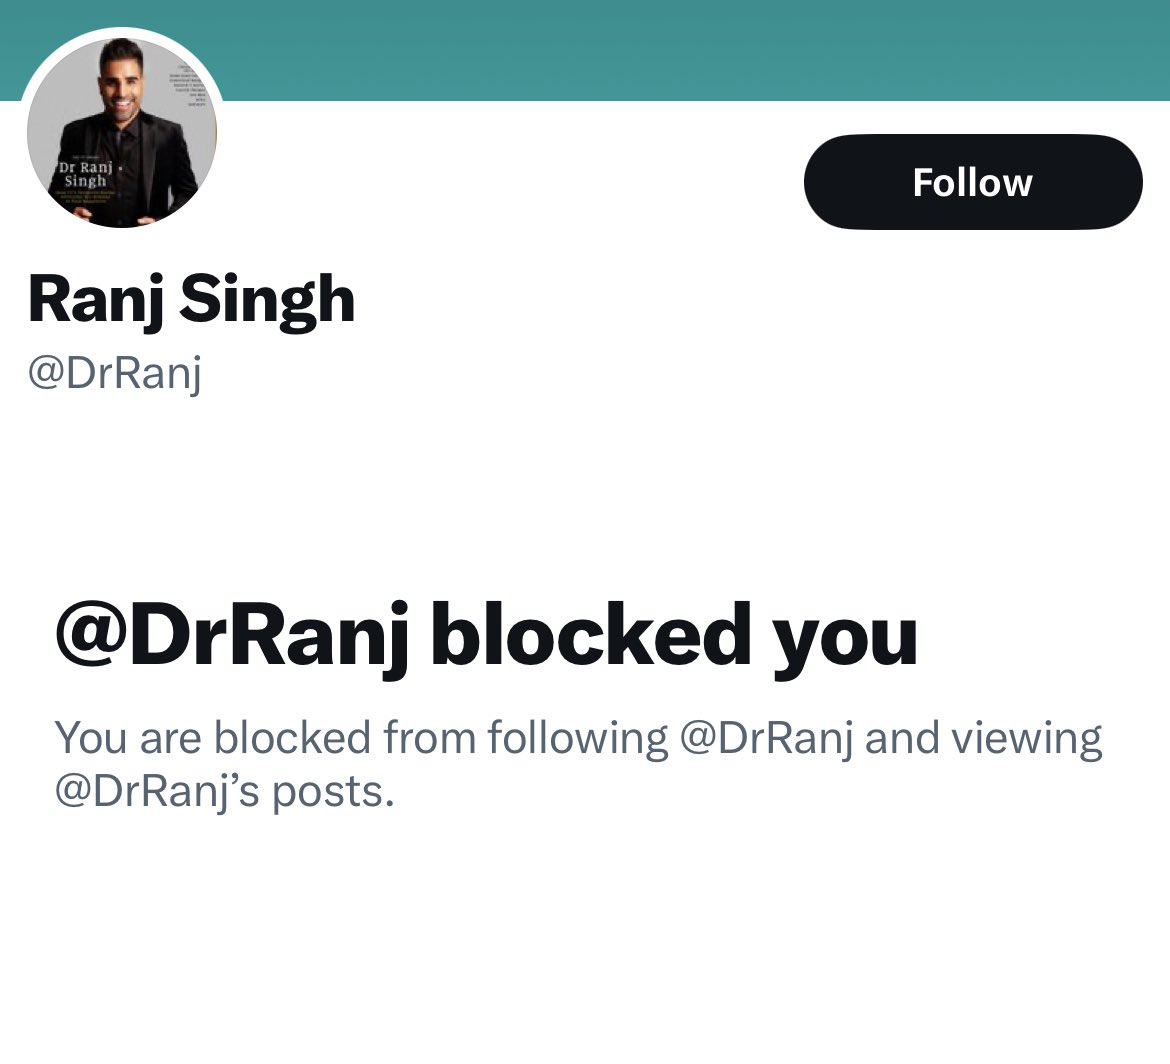 I always wondered why Dr Ranj blocked me 🤔 Sunlight is a very potent disinfectant for malodorous health policy mirror.co.uk/3am/celebrity-…